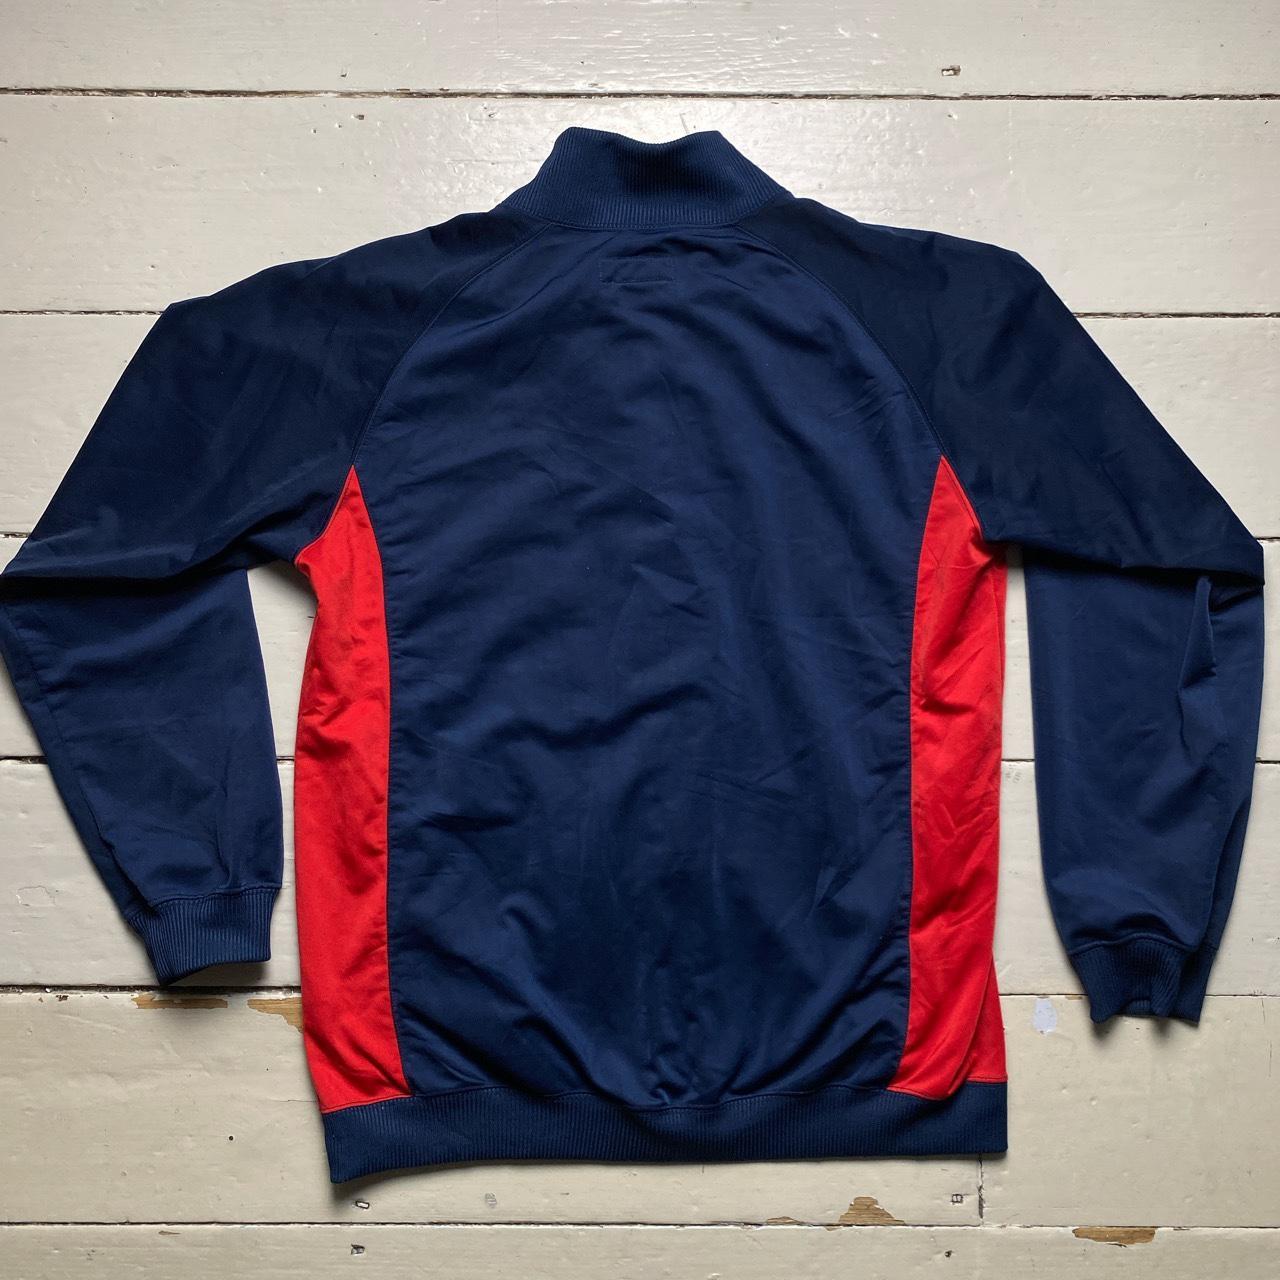 Nike Boston Red Sox Navy and Red Vintage 90’s Baseball Jacket